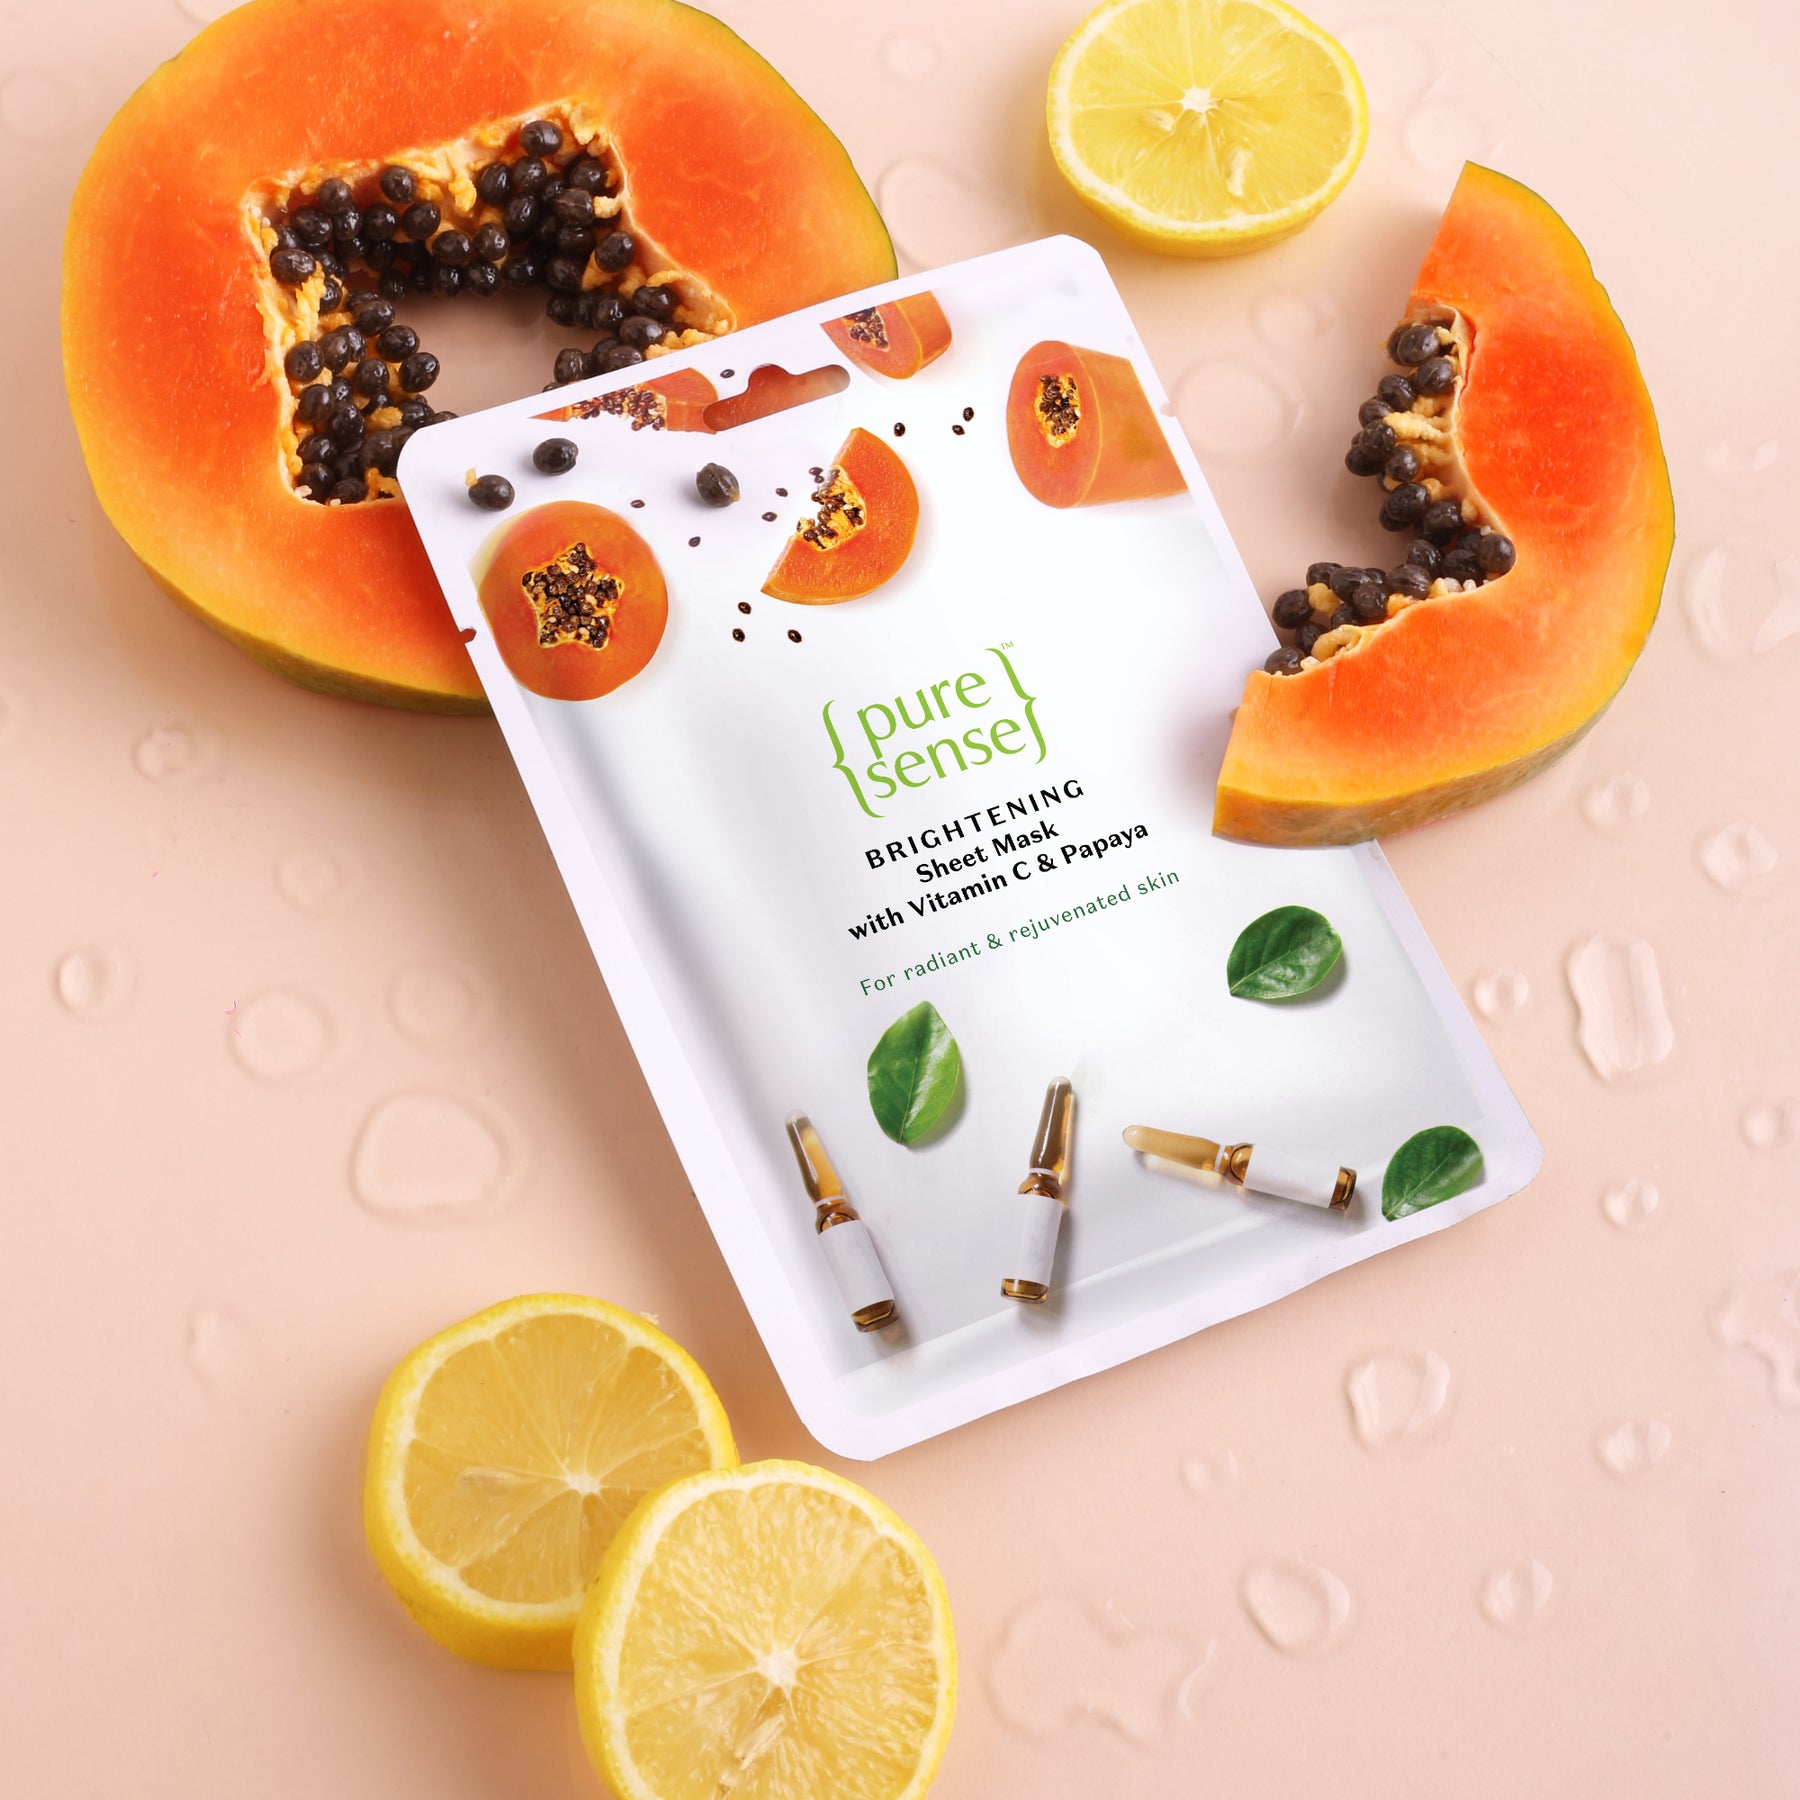 Brightening Sheet Mask with Vitamin C & Papaya | From the makers of Parachute Advansed | 15ml - PureSense